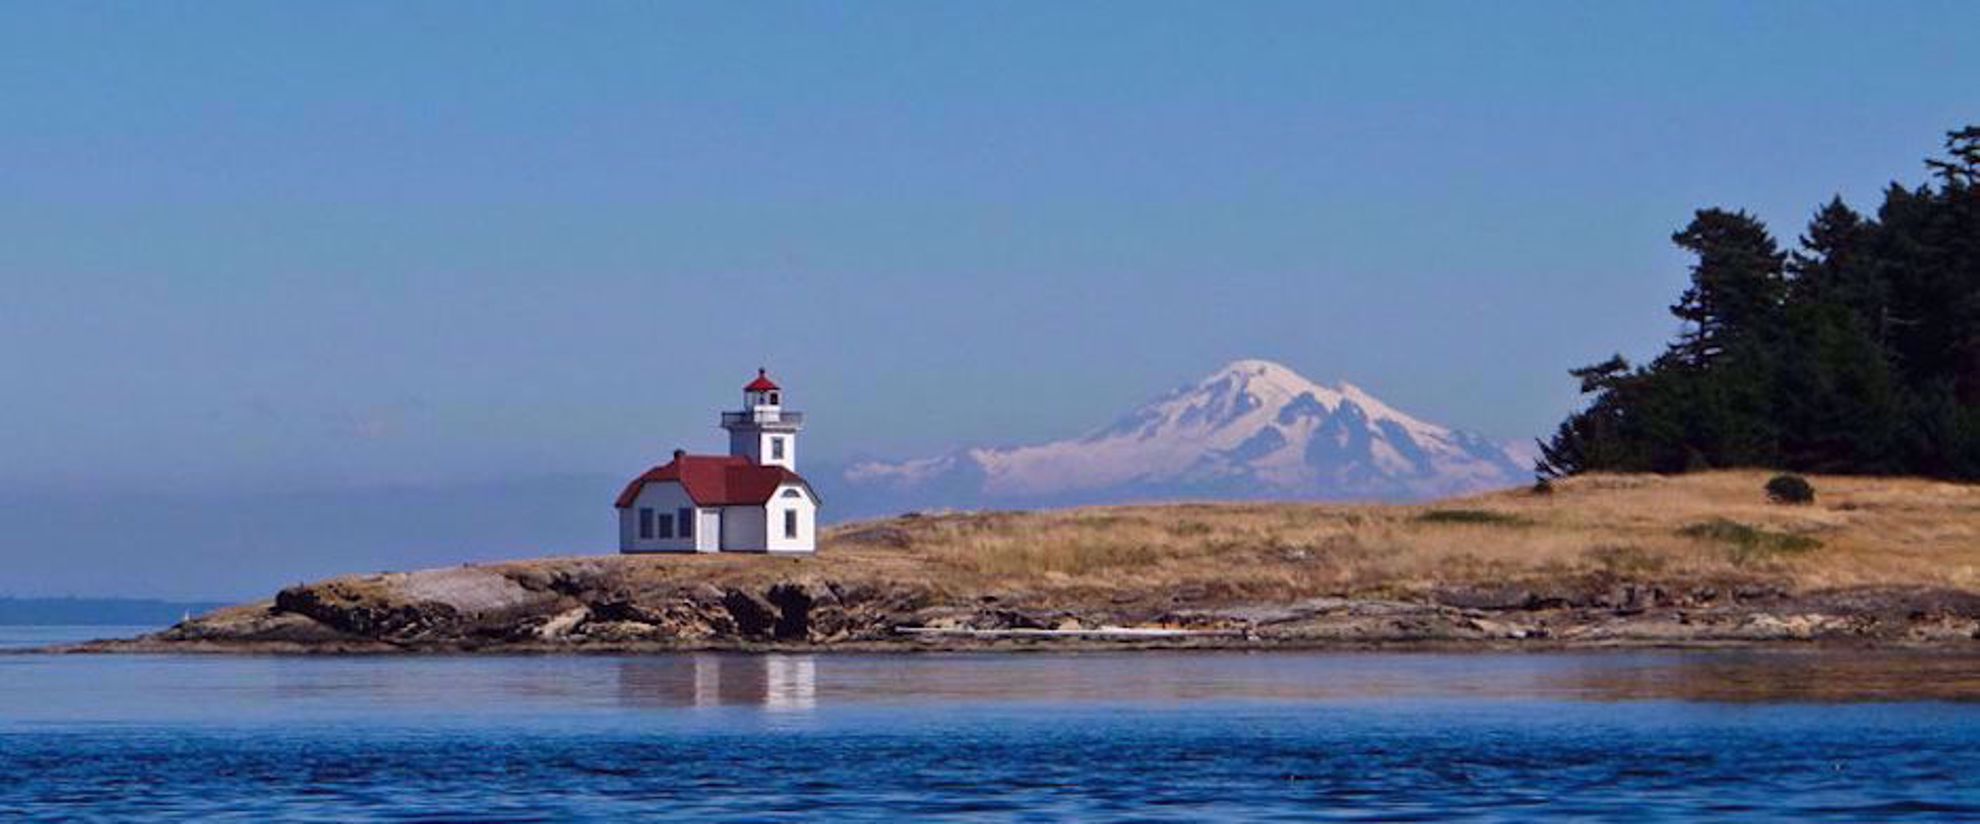 snow capped mountain and lighthouse by water